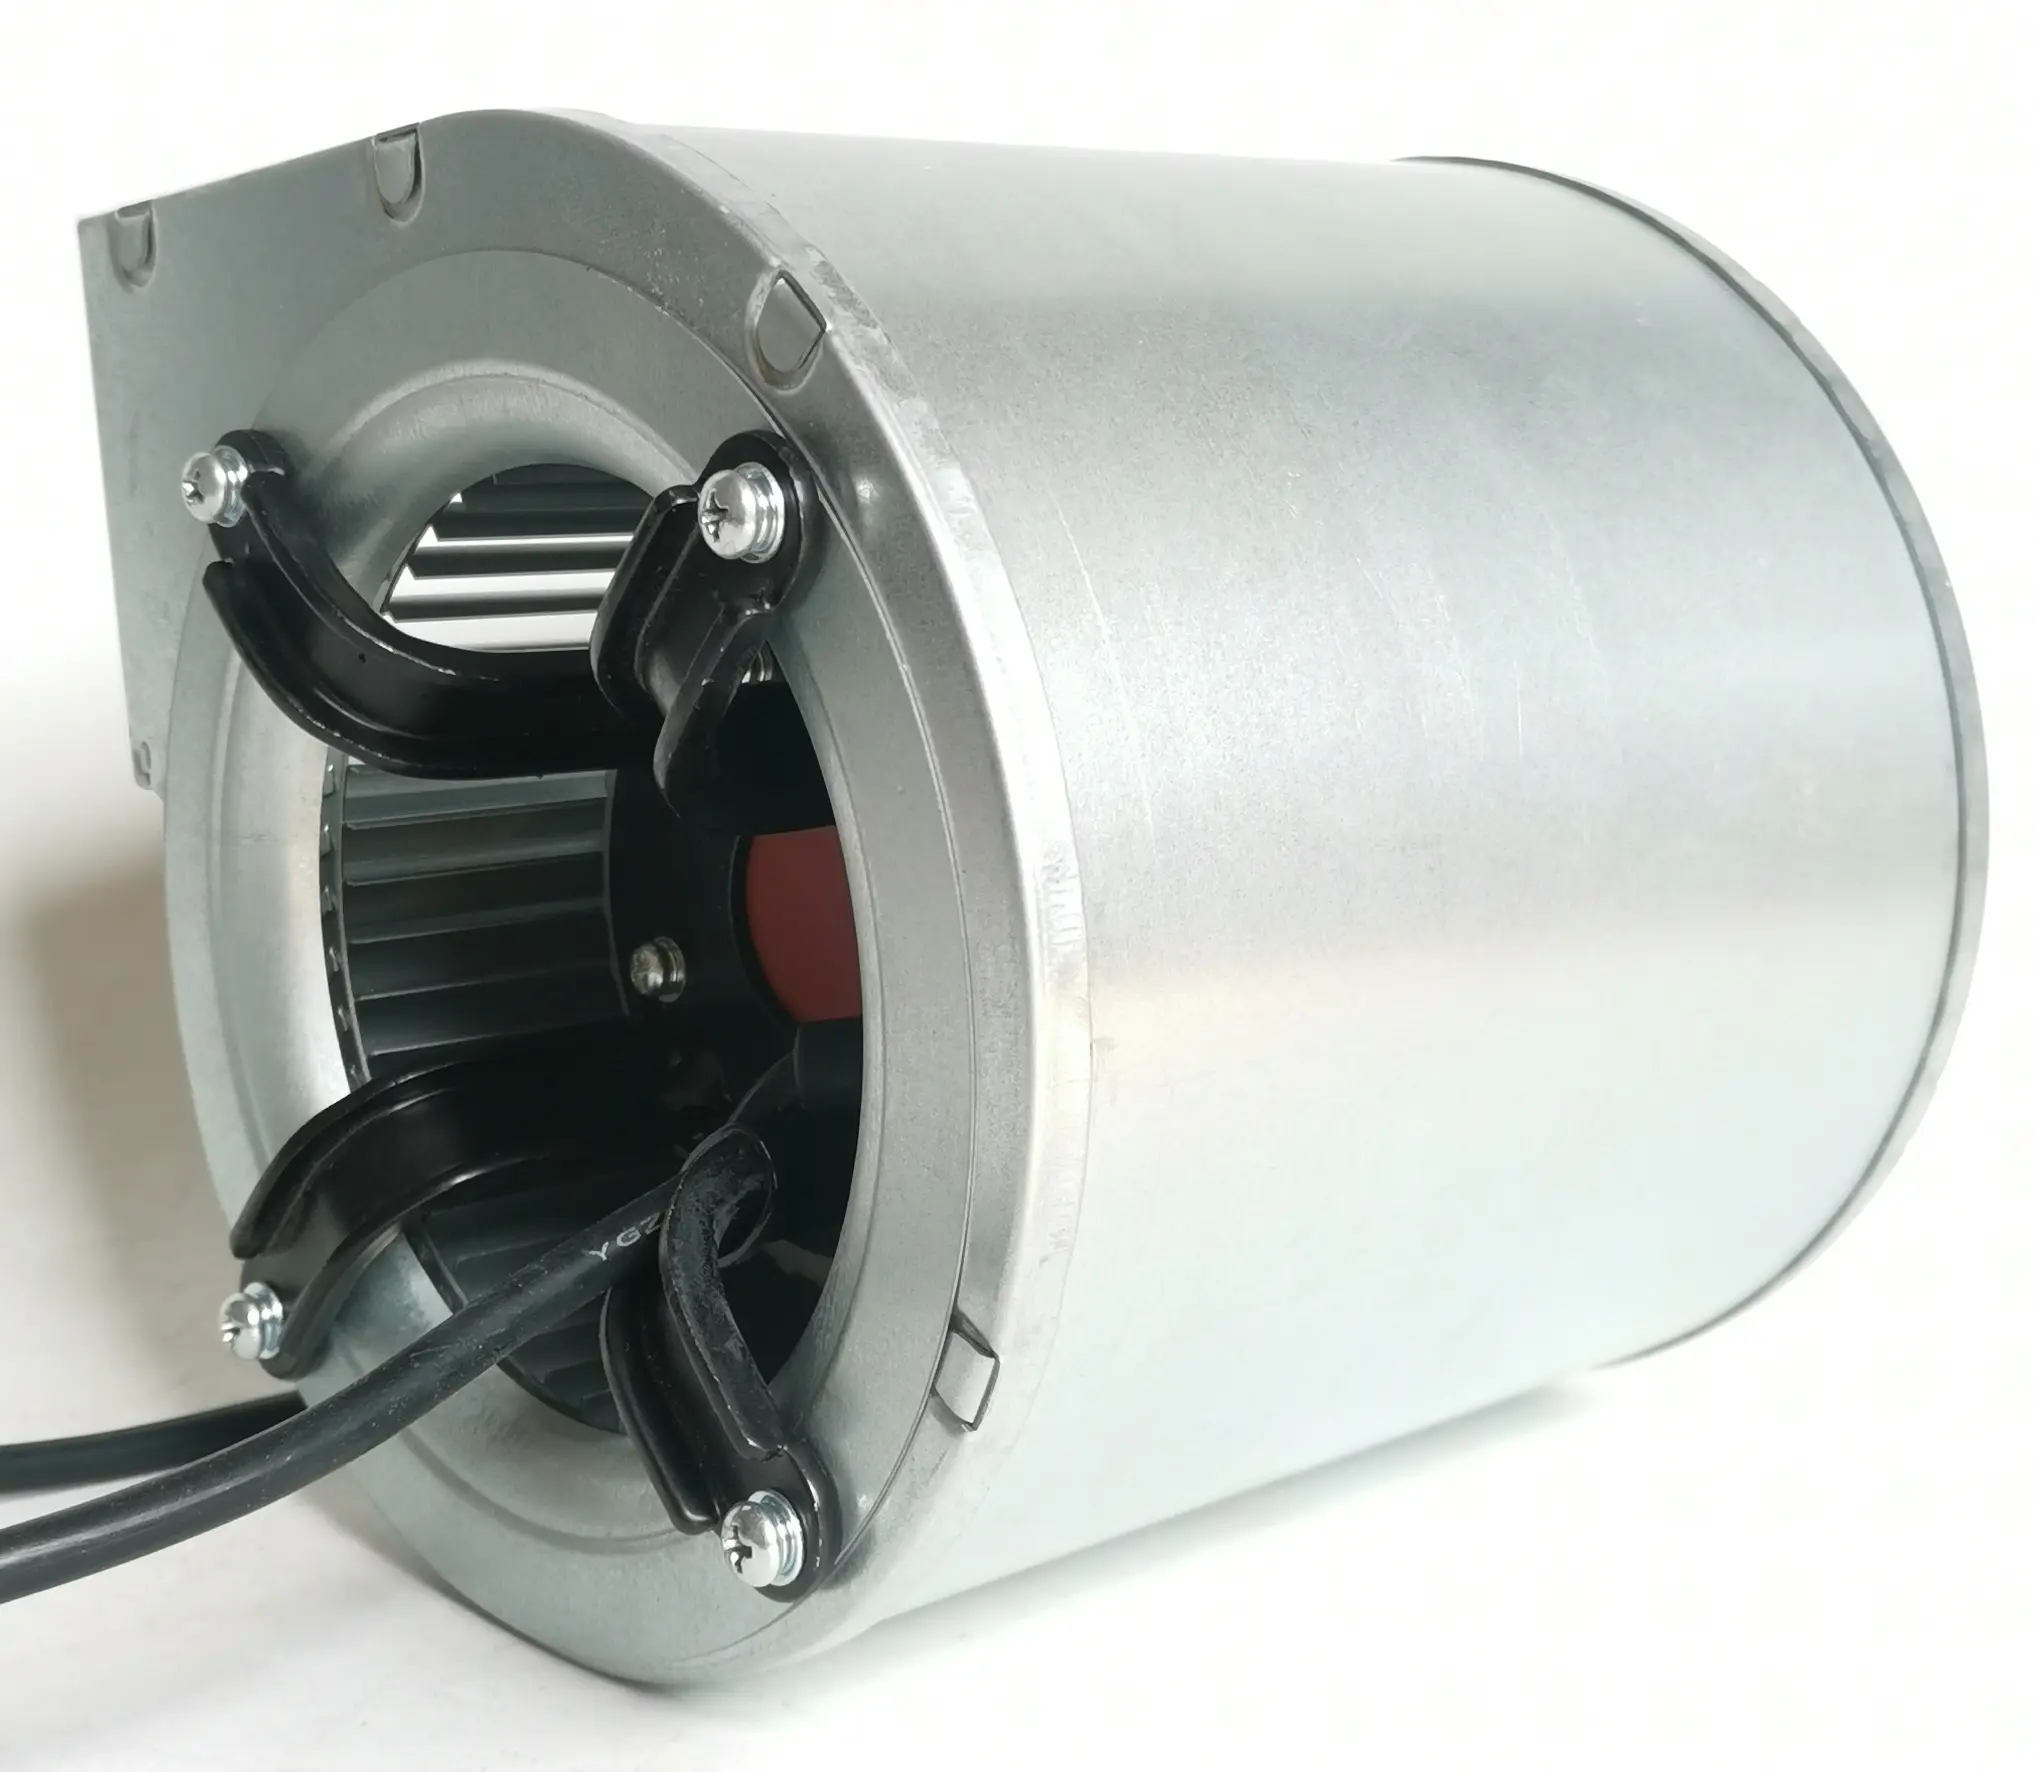 Aneng 24v Dc Centrifugal Fan Blower 120*120mm Double Inlet High Pressure fan for Dryer Transformer Cooling and disinfector